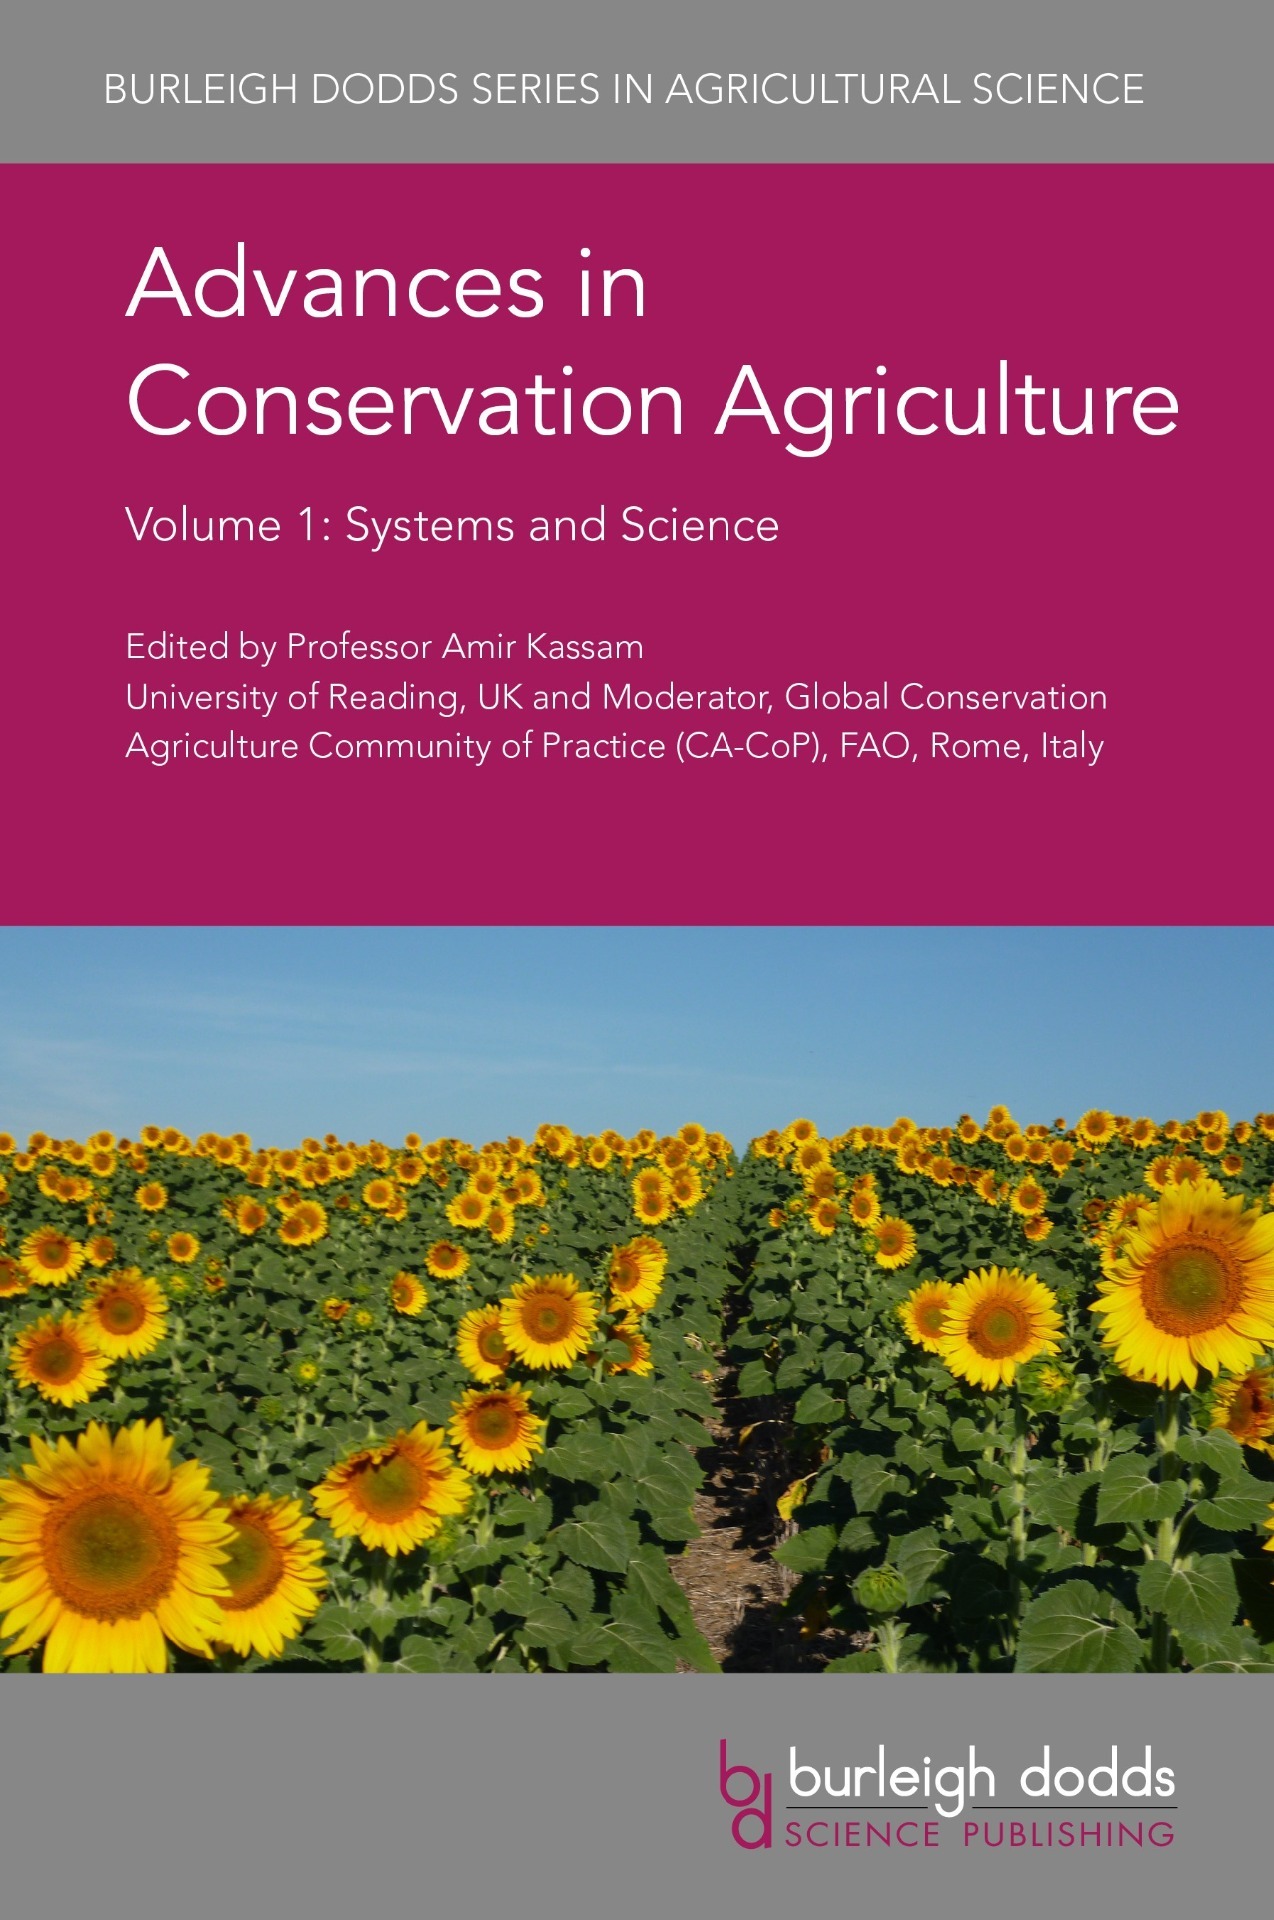 Advances in Conservation Agriculture - Volume 1: Systems and Science